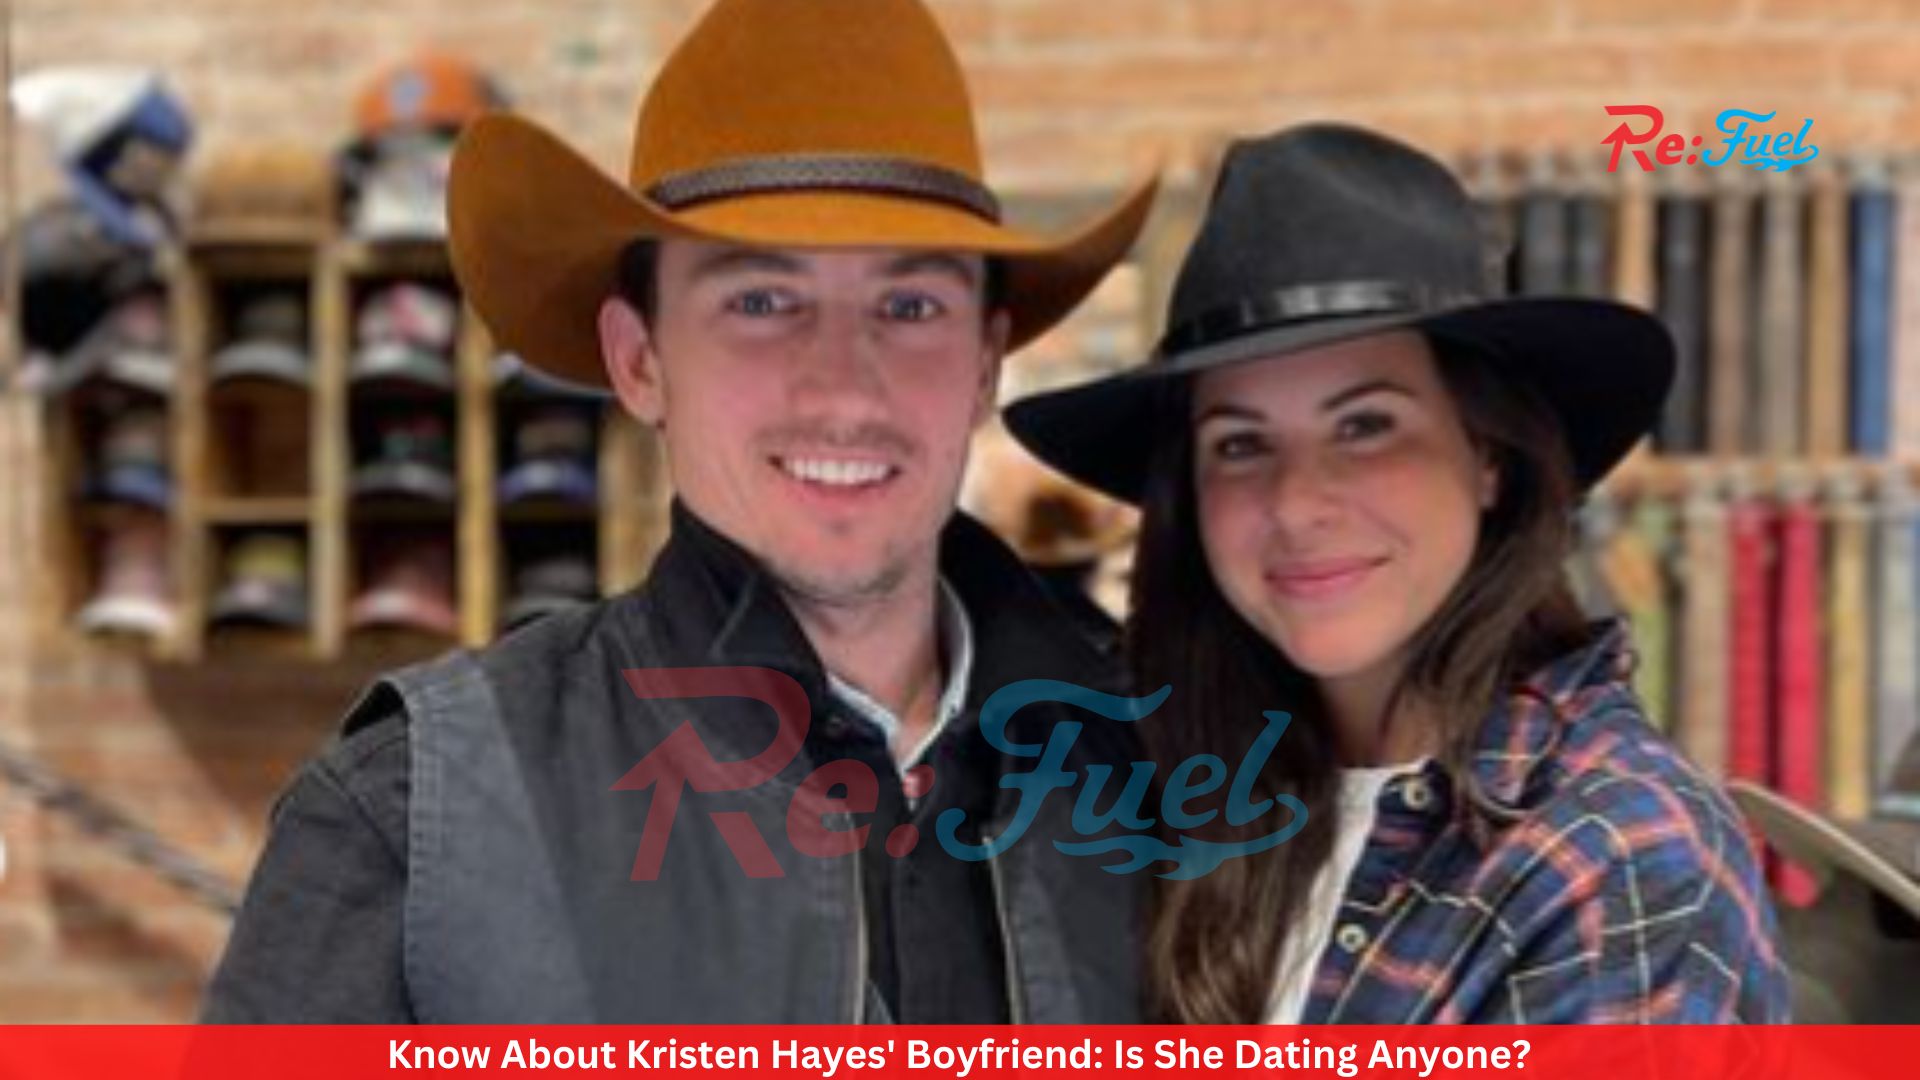 Know About Kristen Hayes' Boyfriend: Is She Dating Anyone?